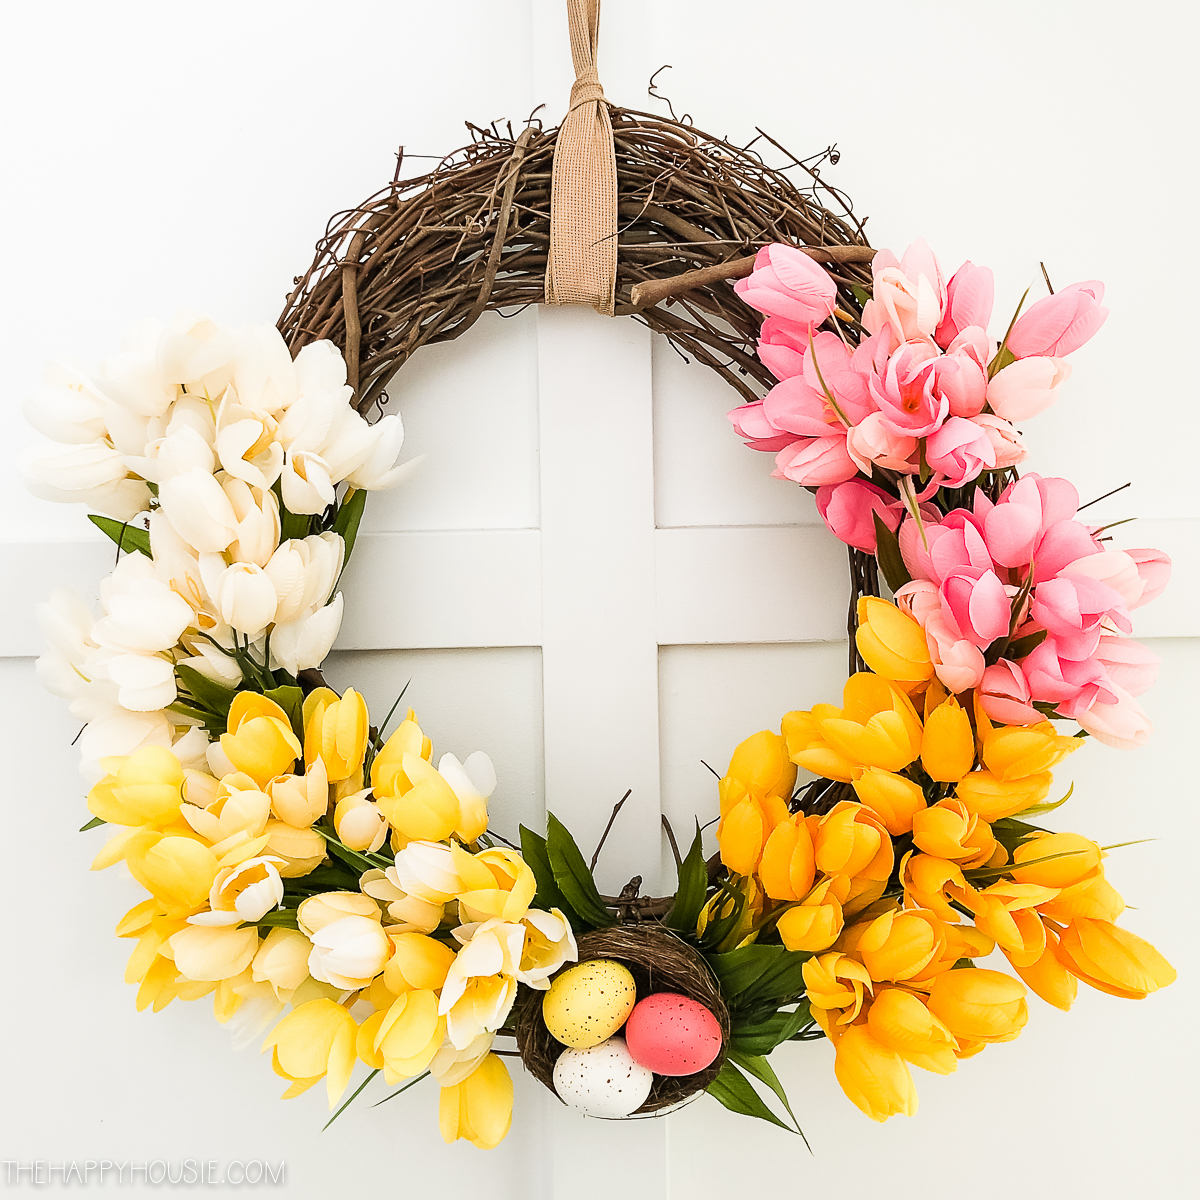 Pink, white, yellow tulips on the wreath.